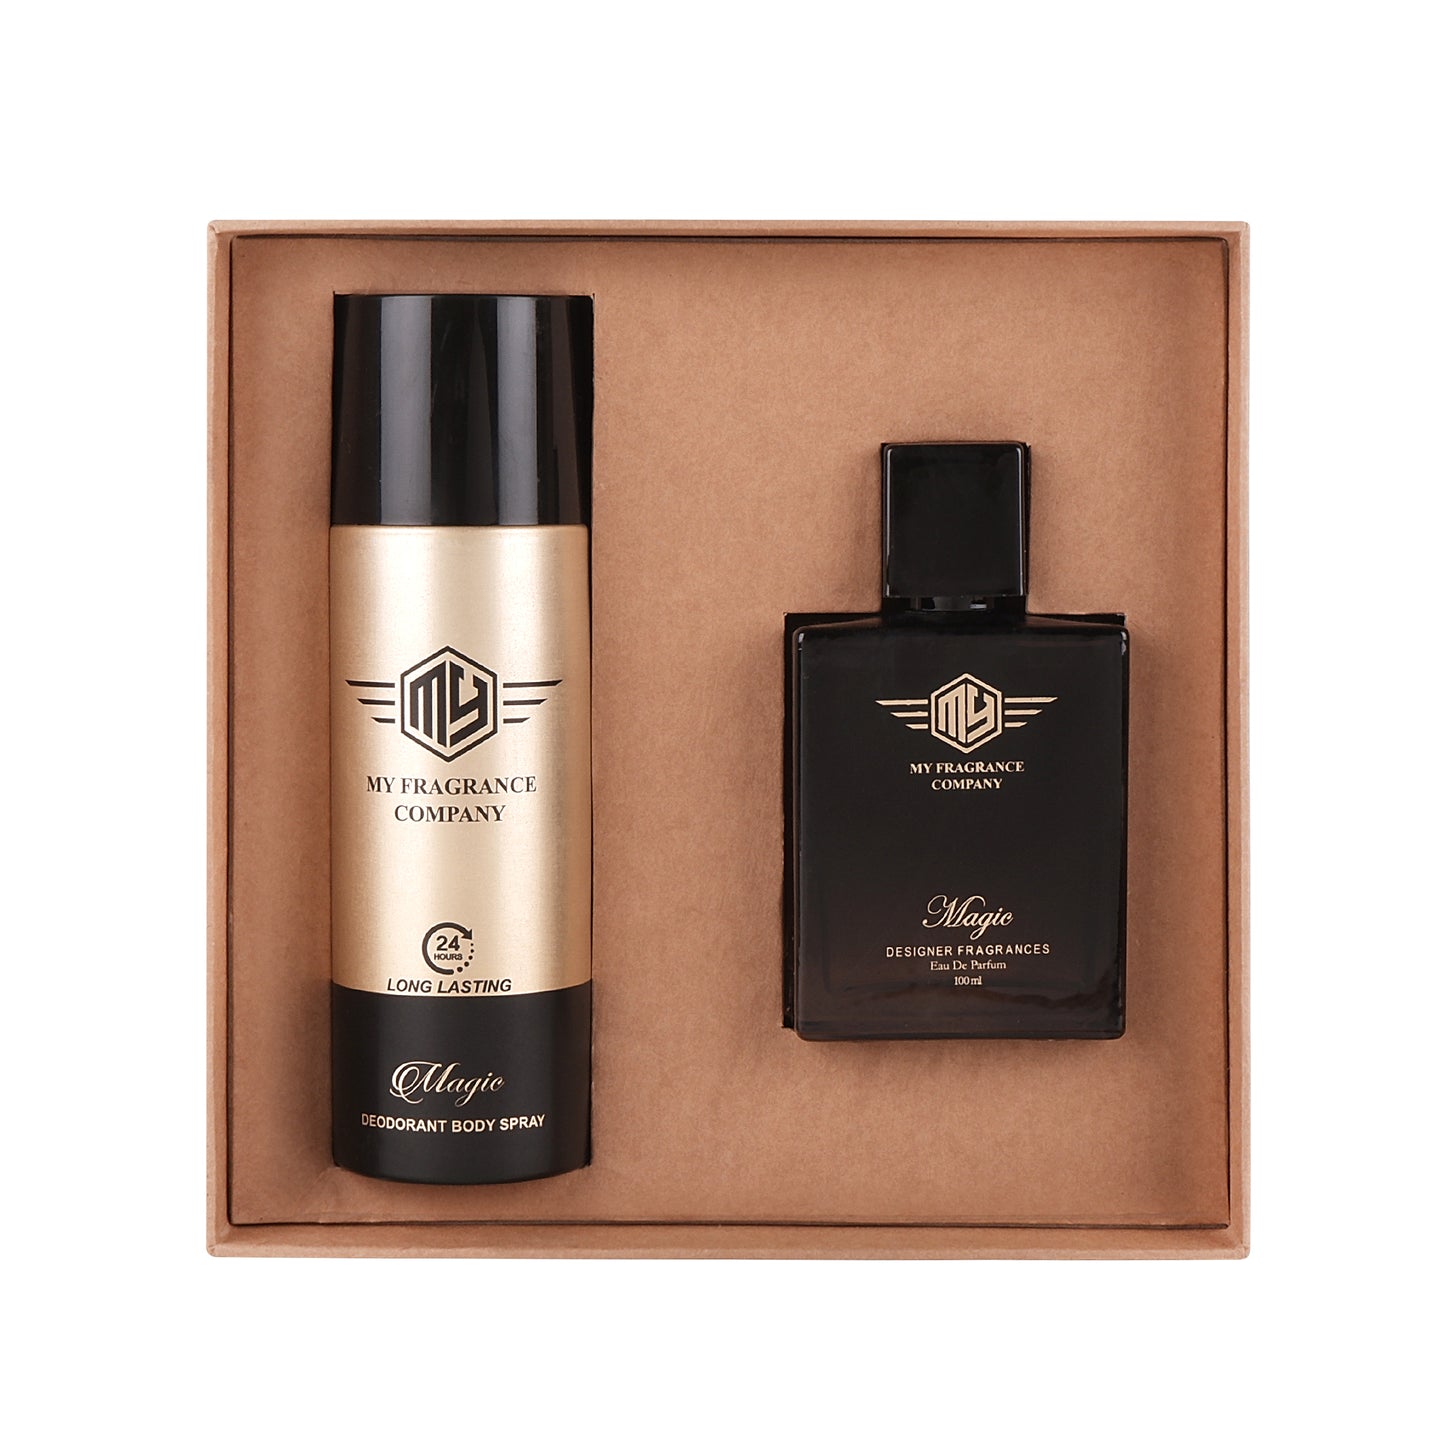 Handcrafted Magic EDP Perfume And Deodorant Premium Long Lasting Fragrance | Combo| (2 Items in the one set)